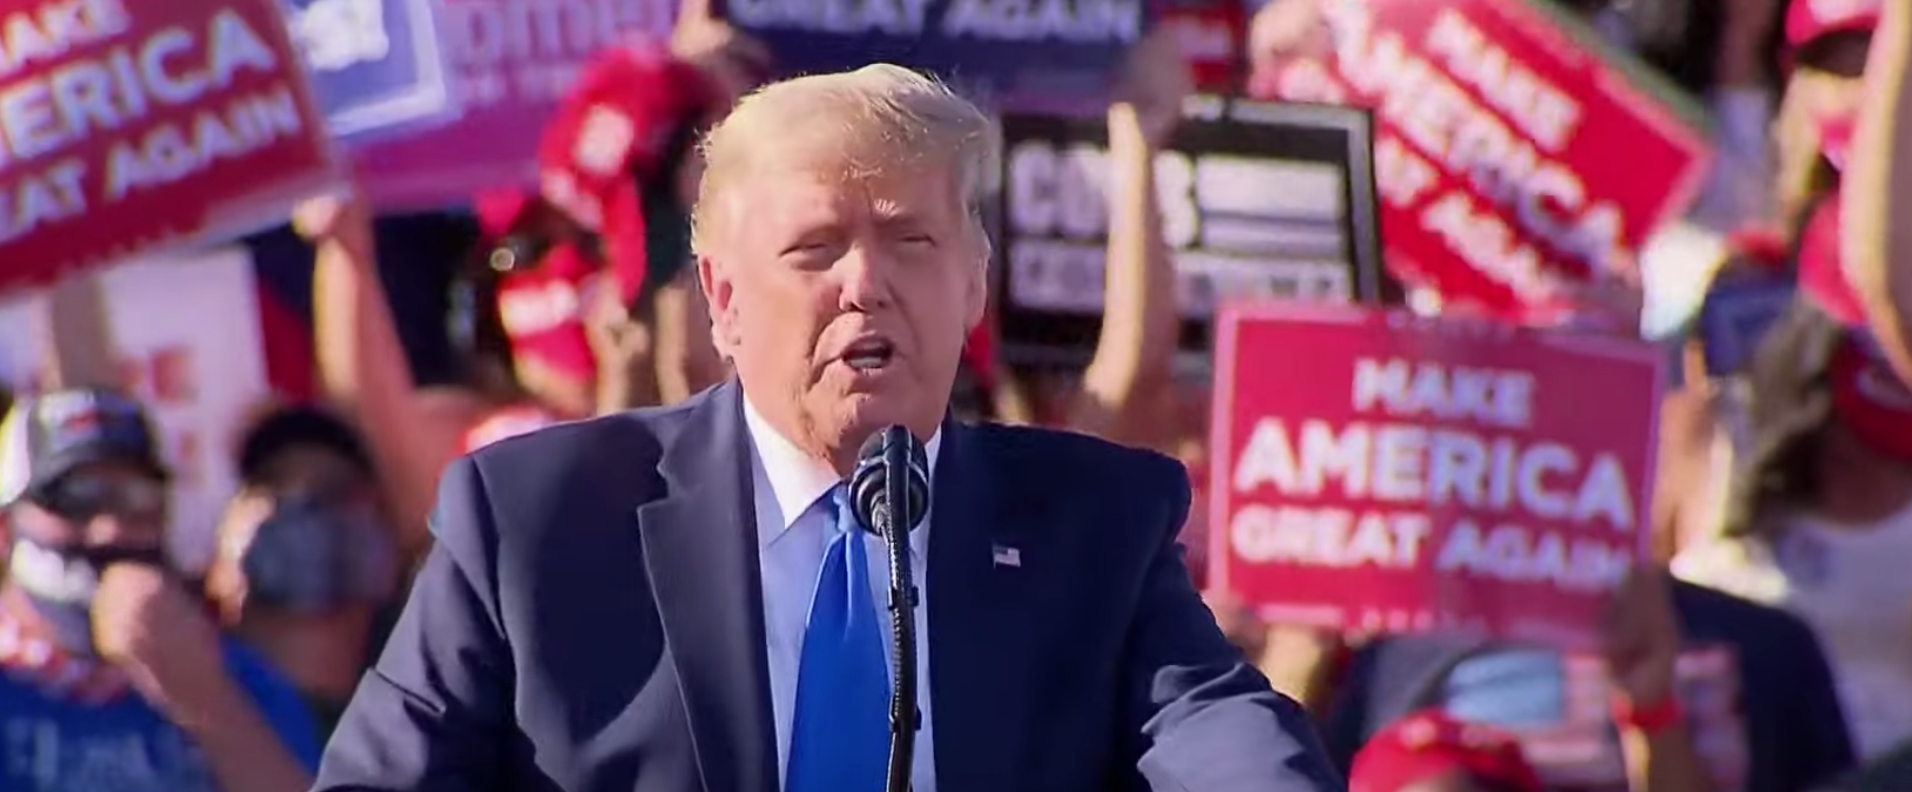 Trump Mockingly Says Biden Will "Listen To The Scientists" If Elected